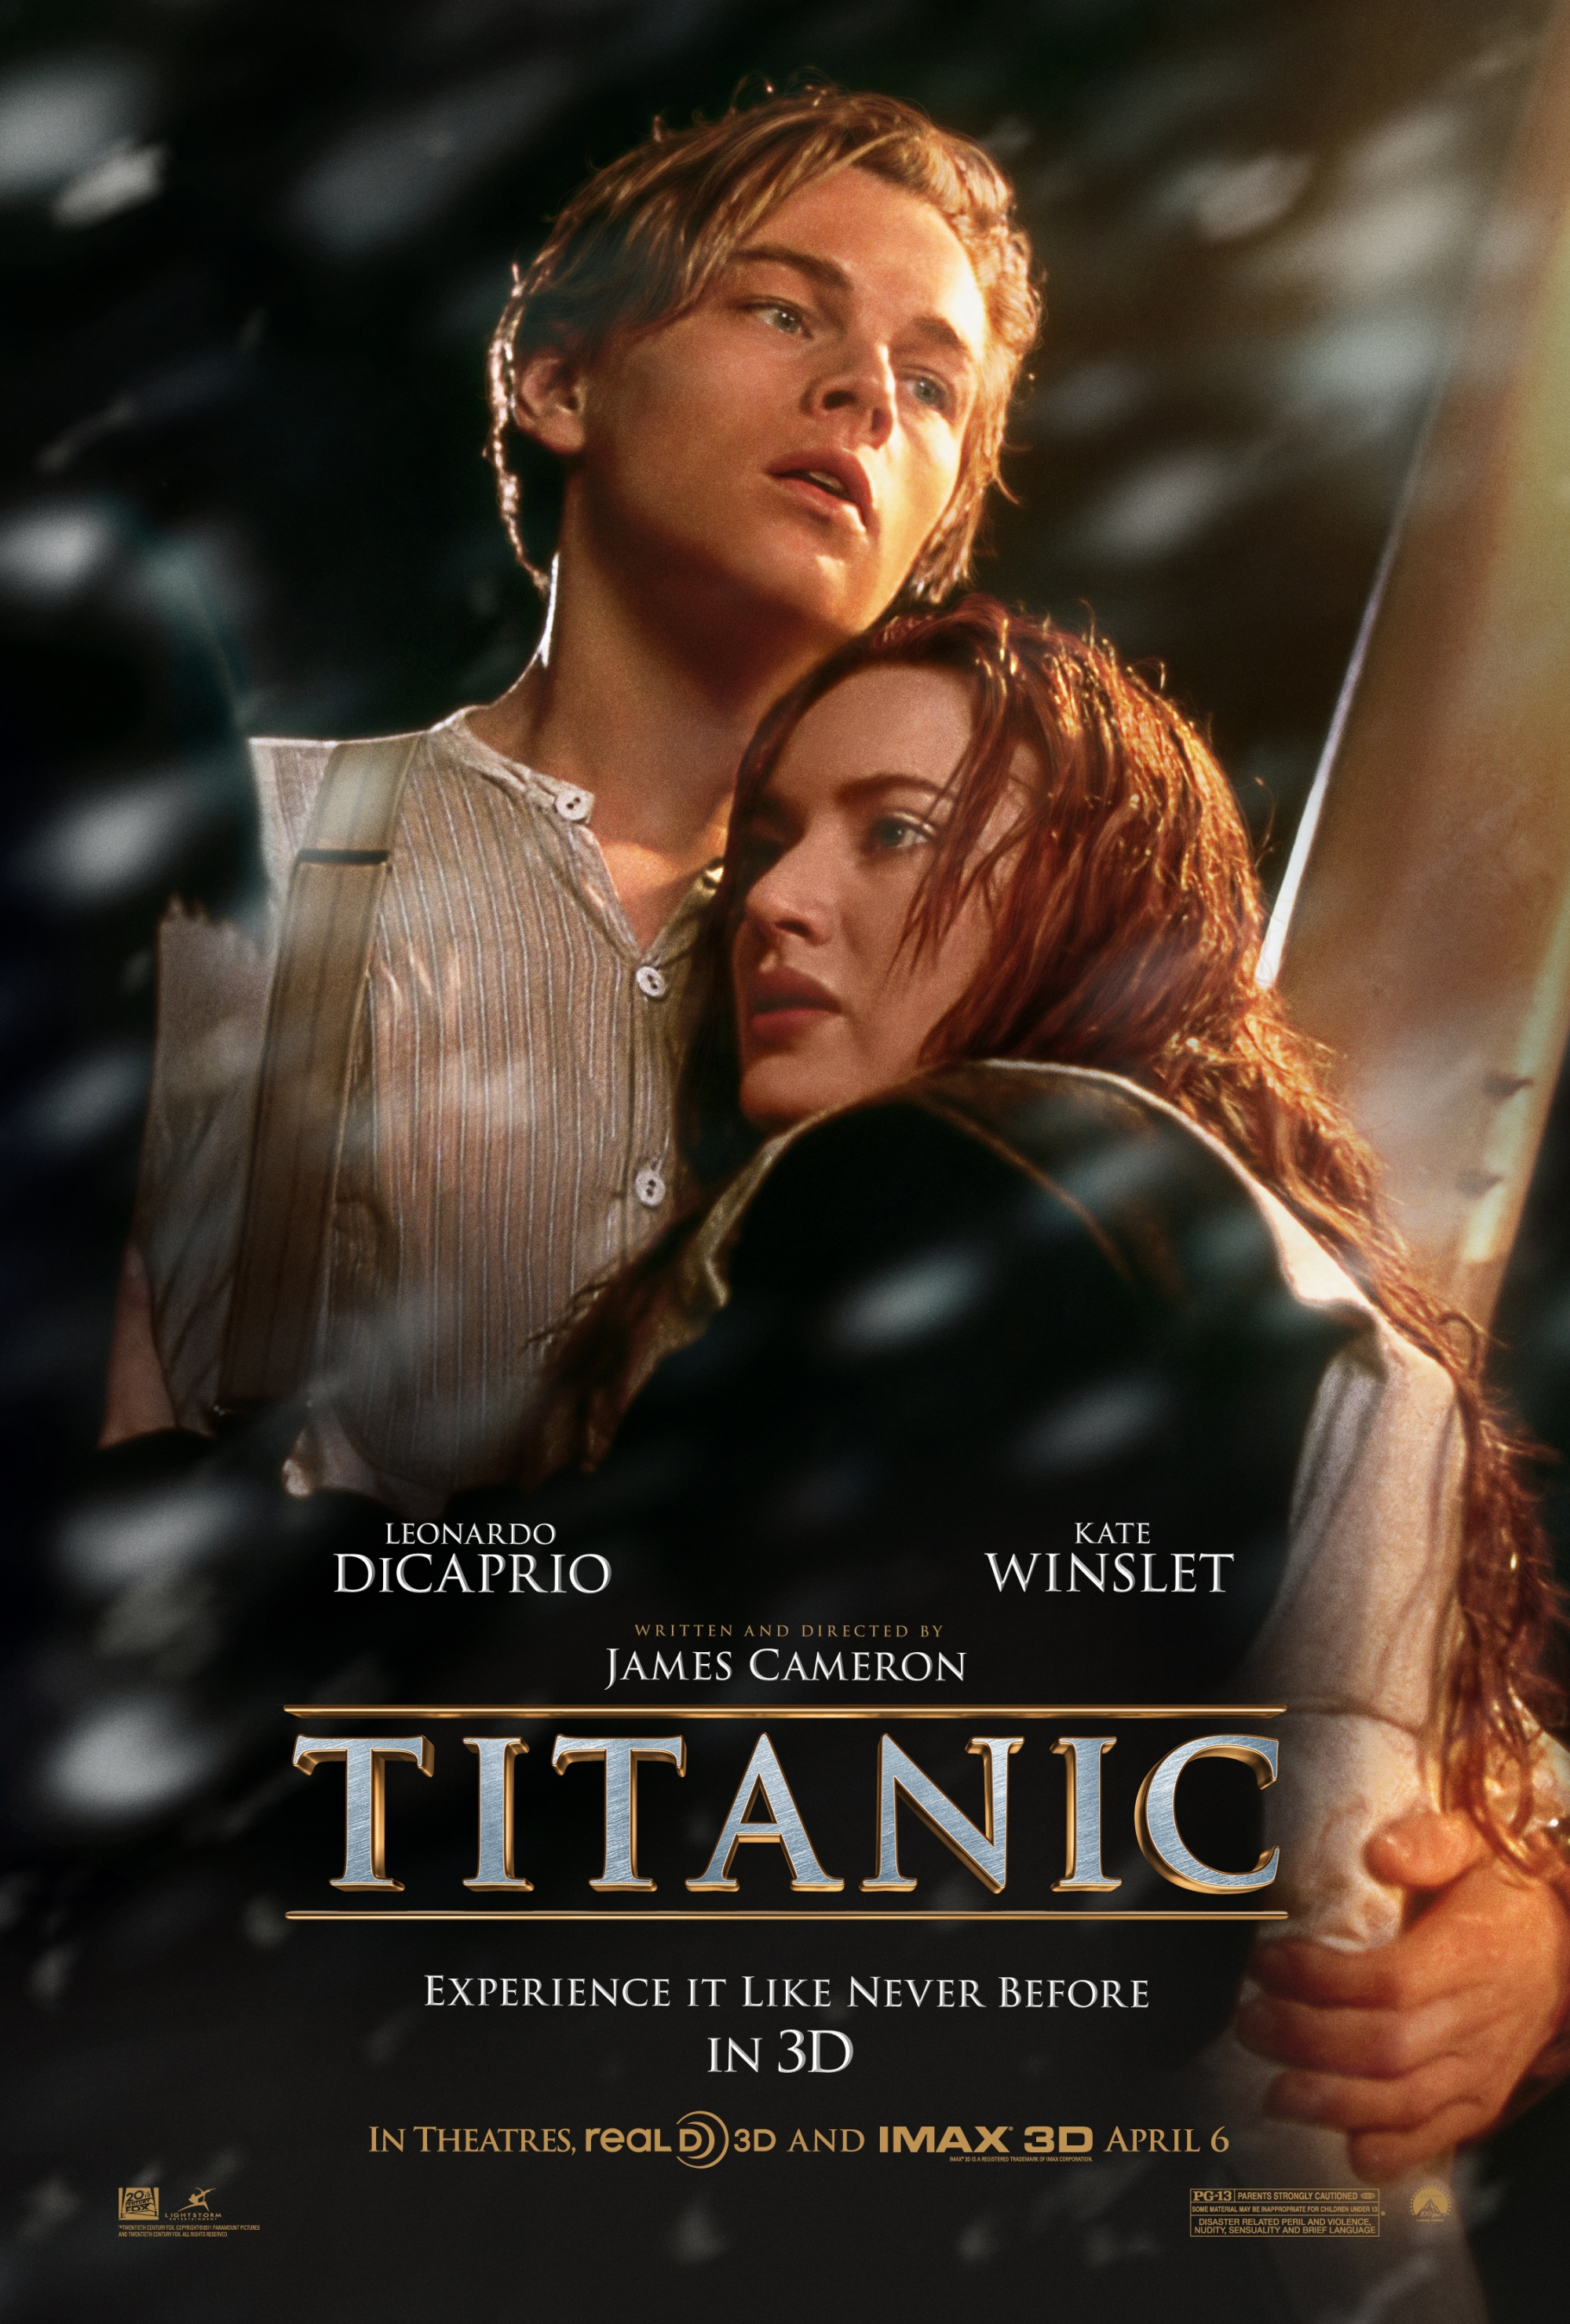 The 2D trailer for Titanic 3D!!